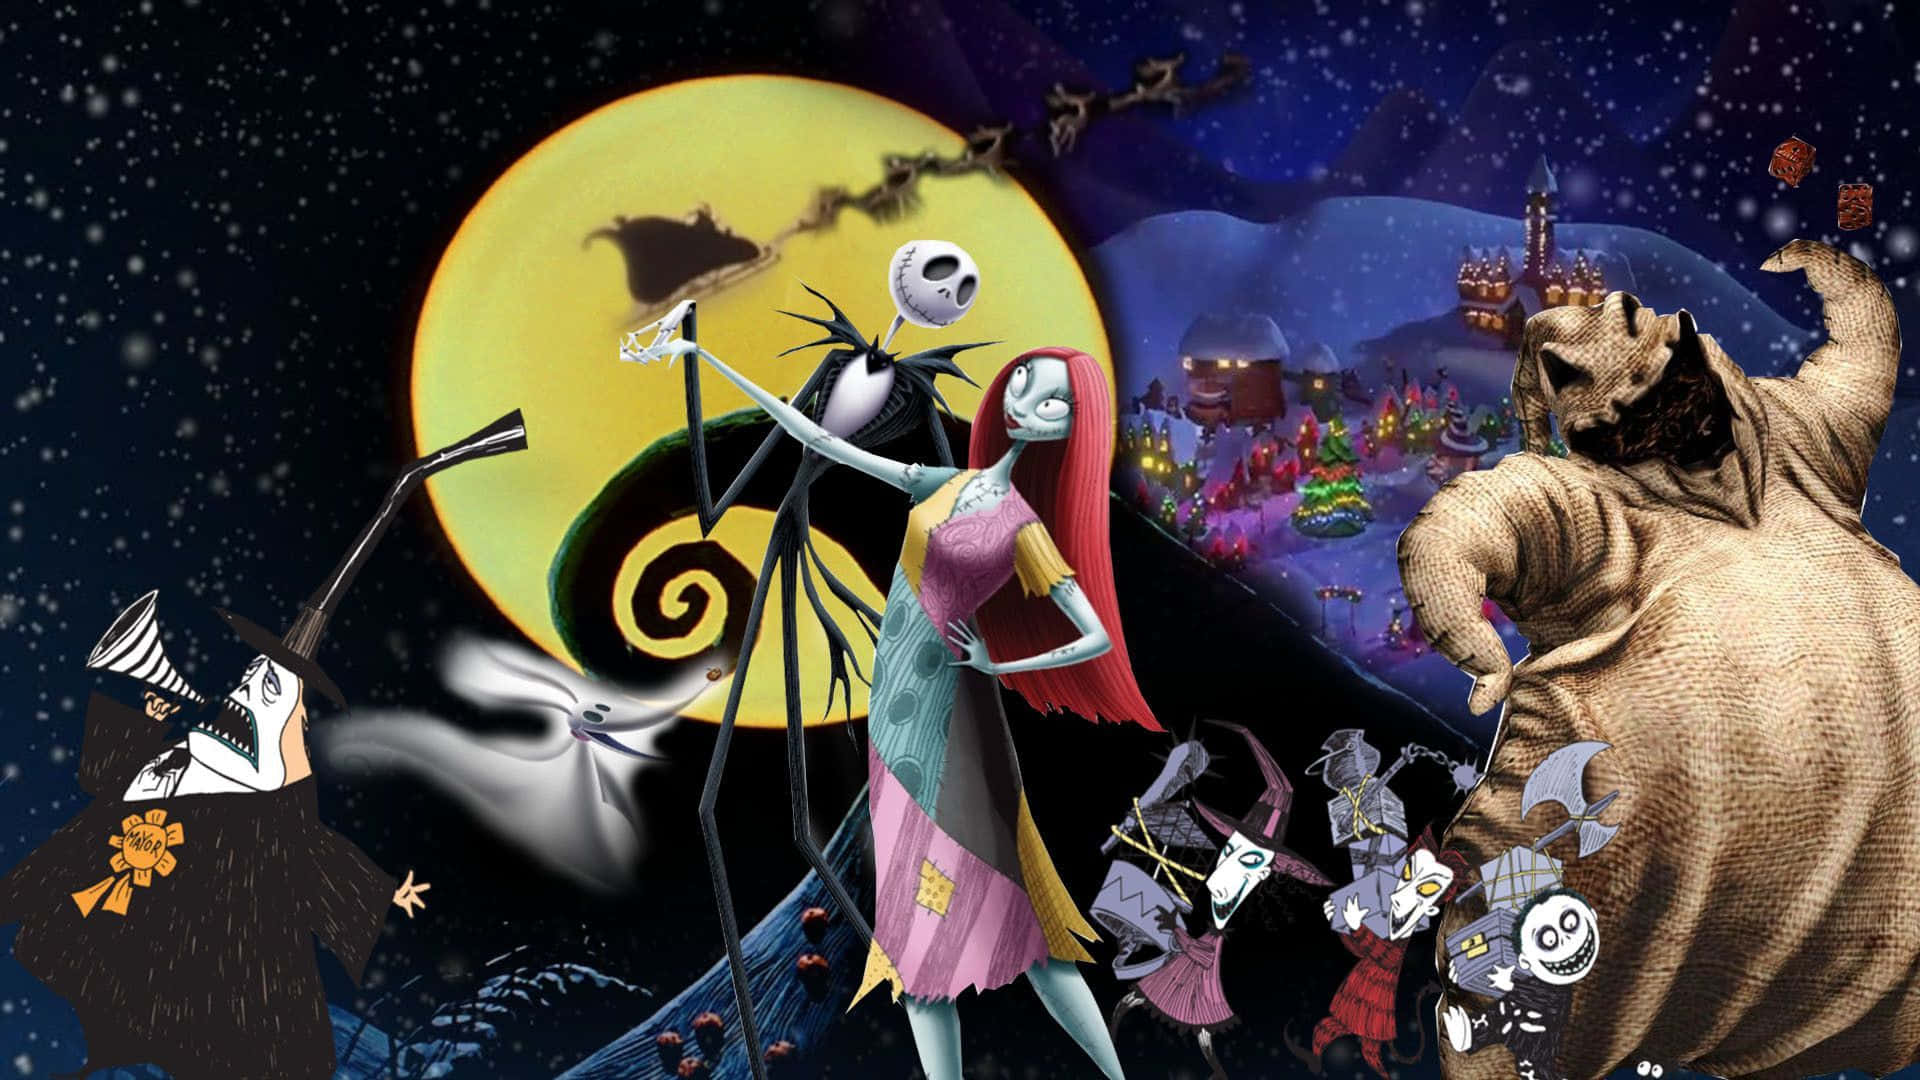 Sally - a rag-doll of Dr. Finkelstein from The Nightmare Before Christmas Wallpaper